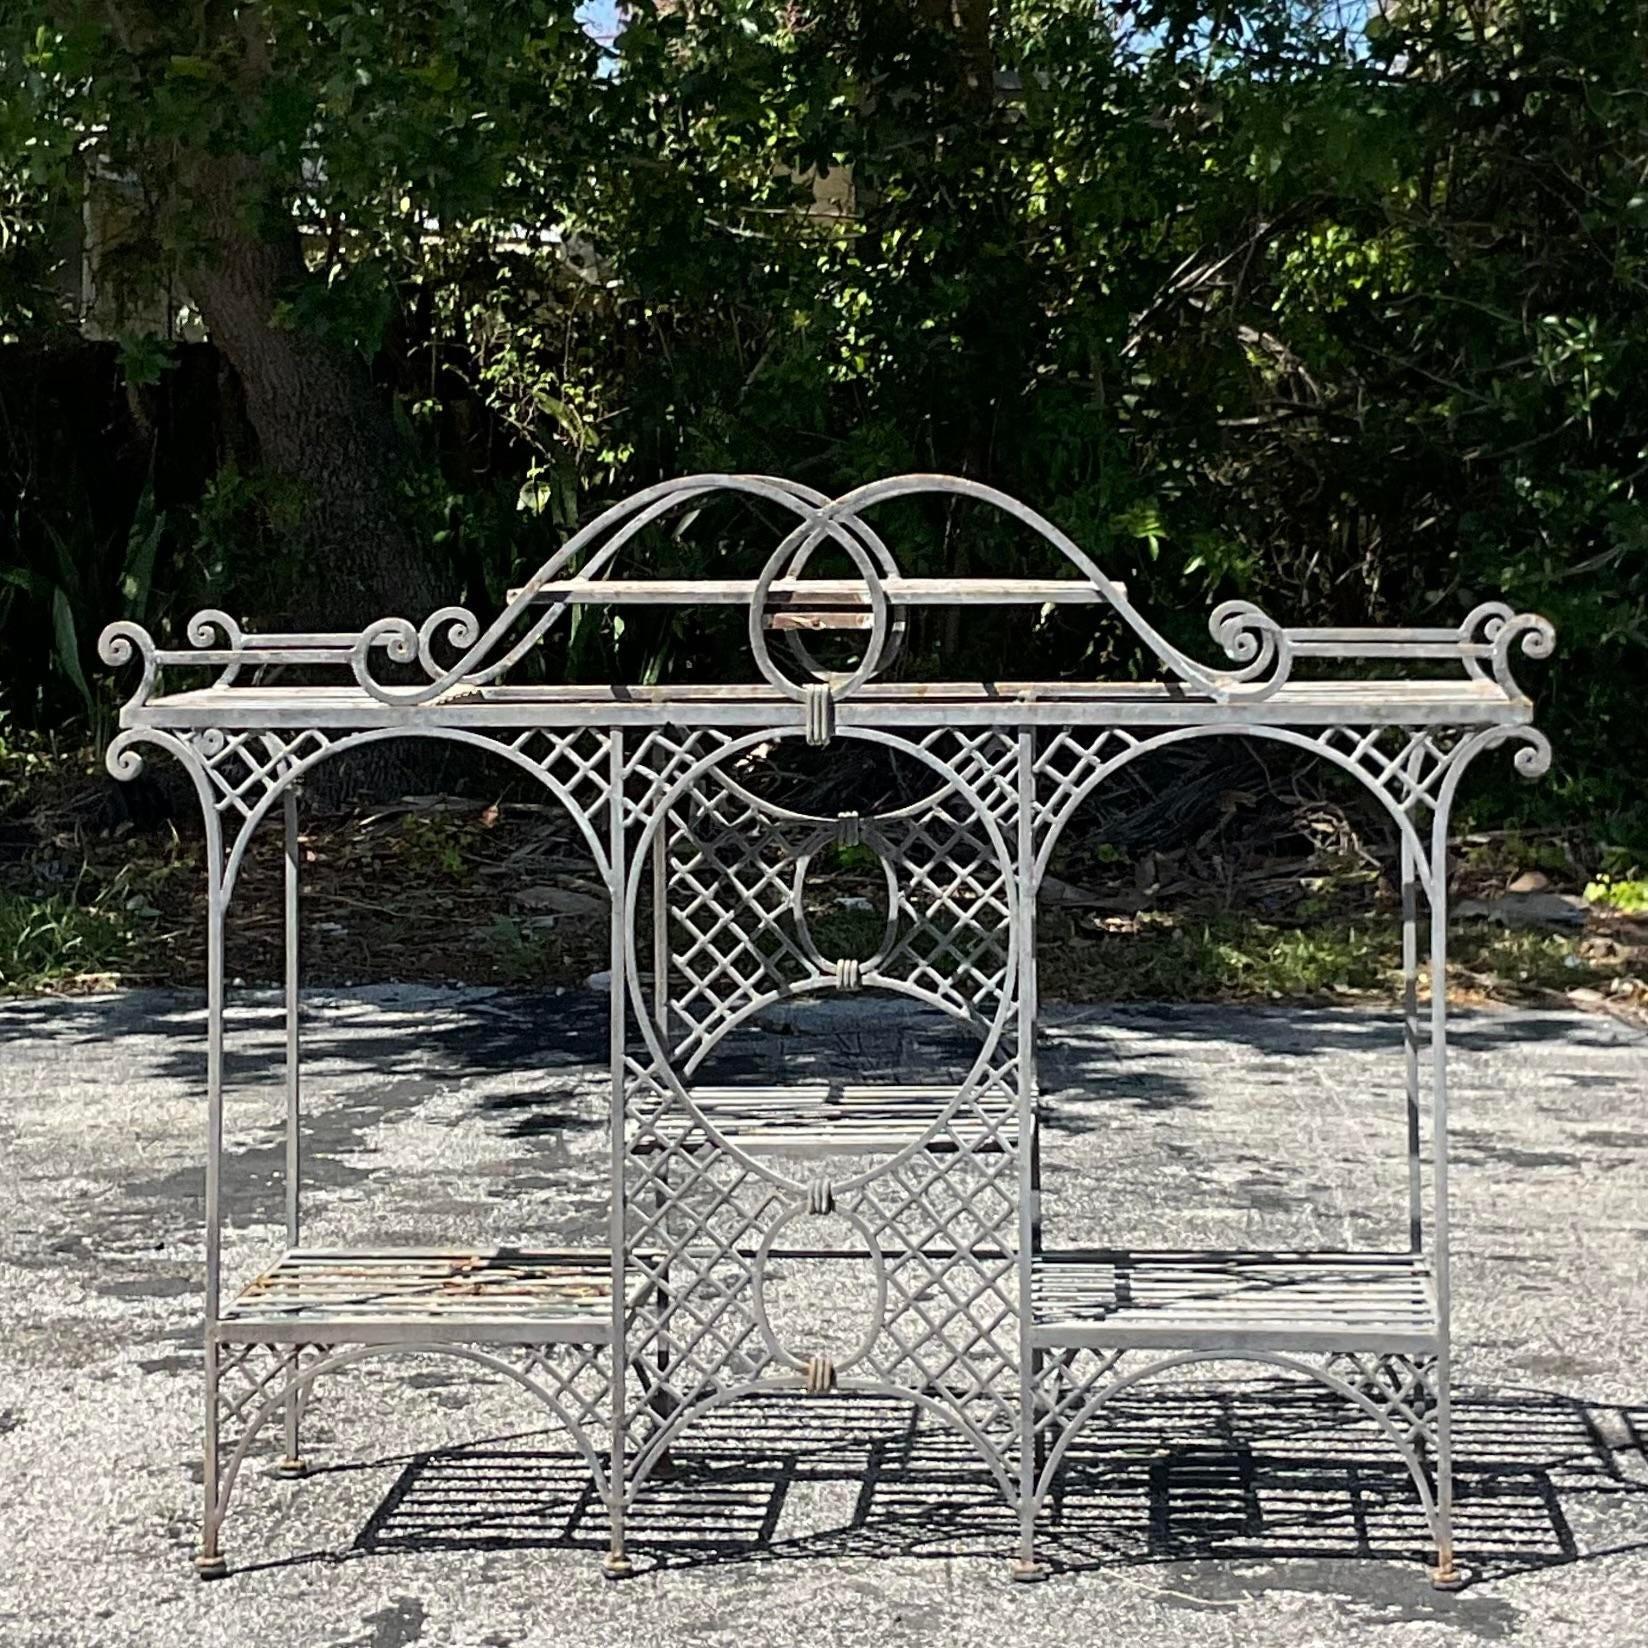 Embrace outdoor elegance with the Vintage Coastal Wrought Iron Trellis Console Table. Crafted with enduring American craftsmanship, this table seamlessly combines coastal charm with functional design. The wrought iron construction ensures durability